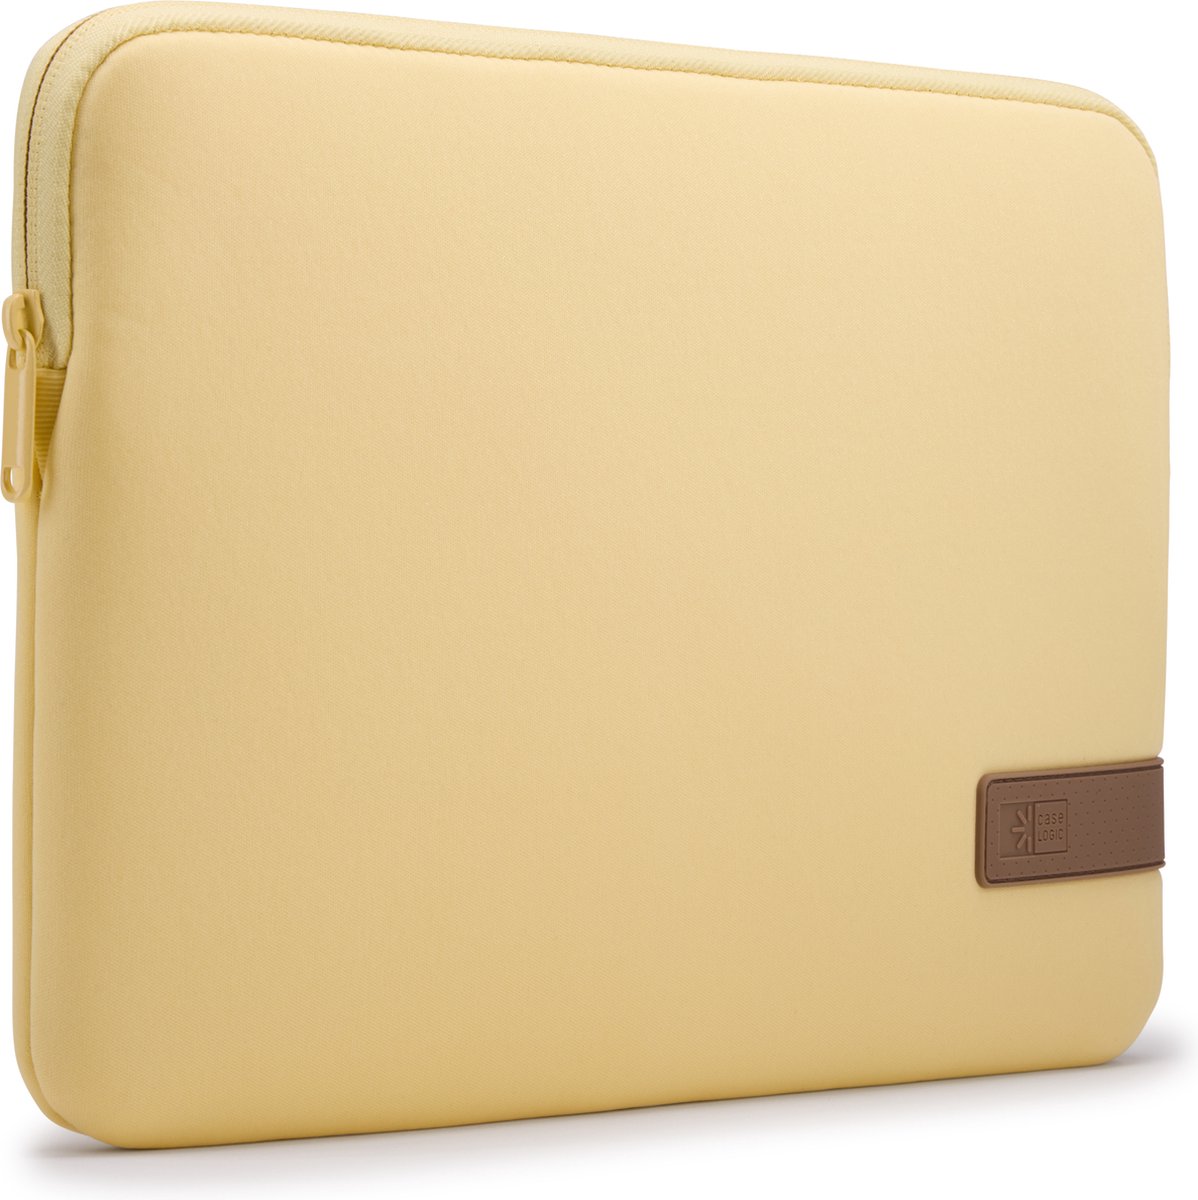 Case Logic REFMB113 - Laptophoes/ Sleeve - Macbook - 13 inch - Yonder Yellow